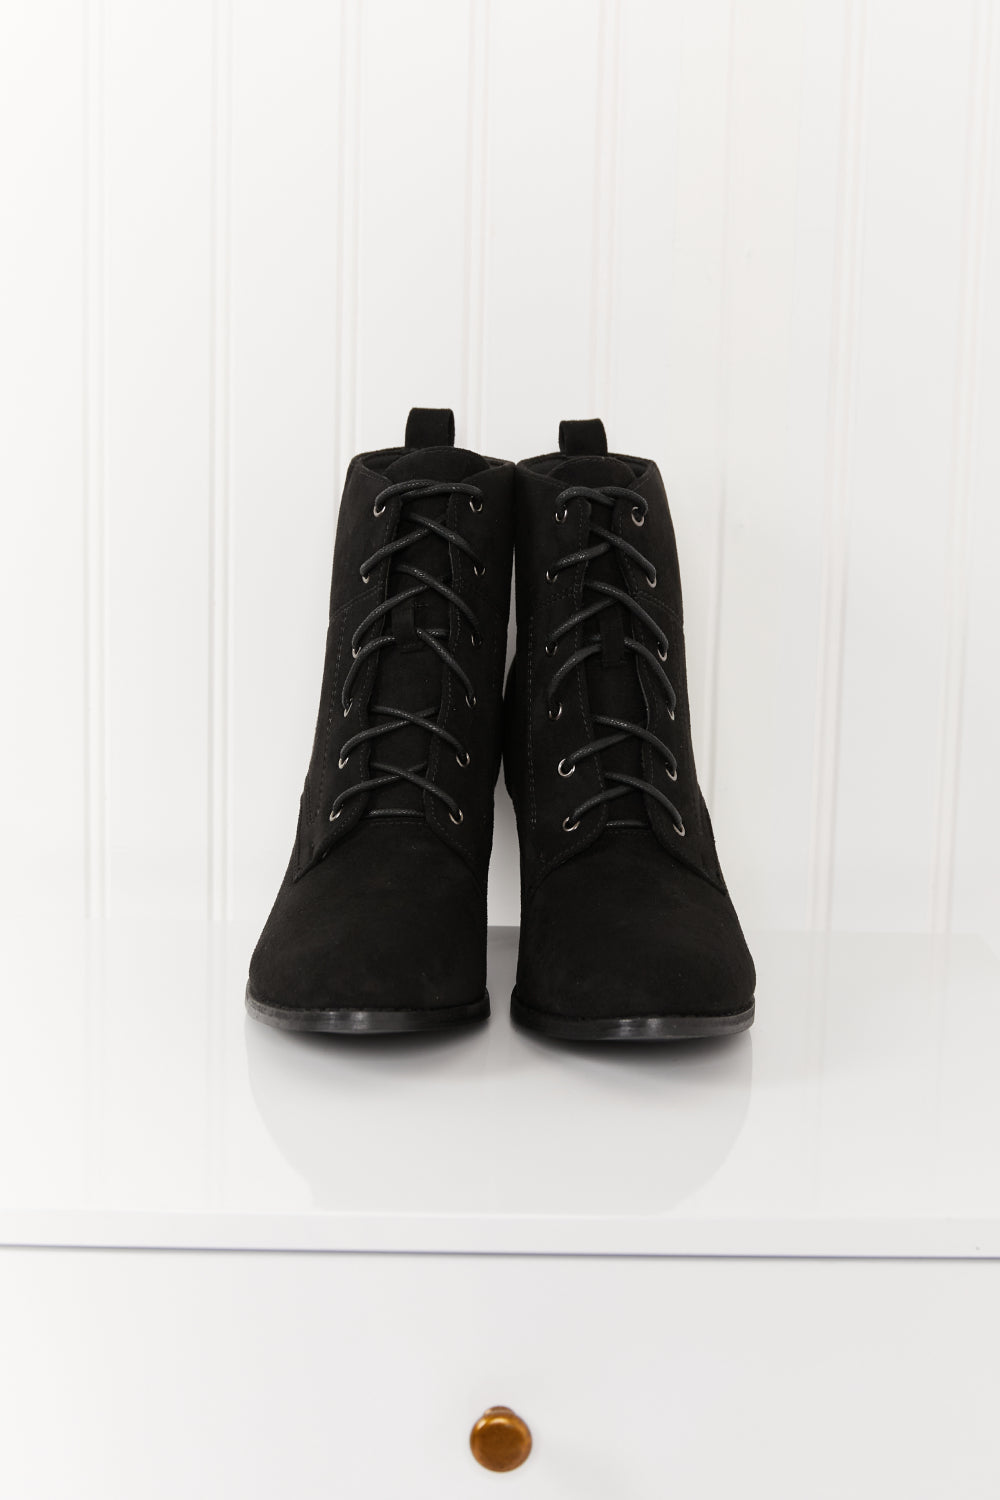 Forever Fall Lace-Up Heeled Booties in Black